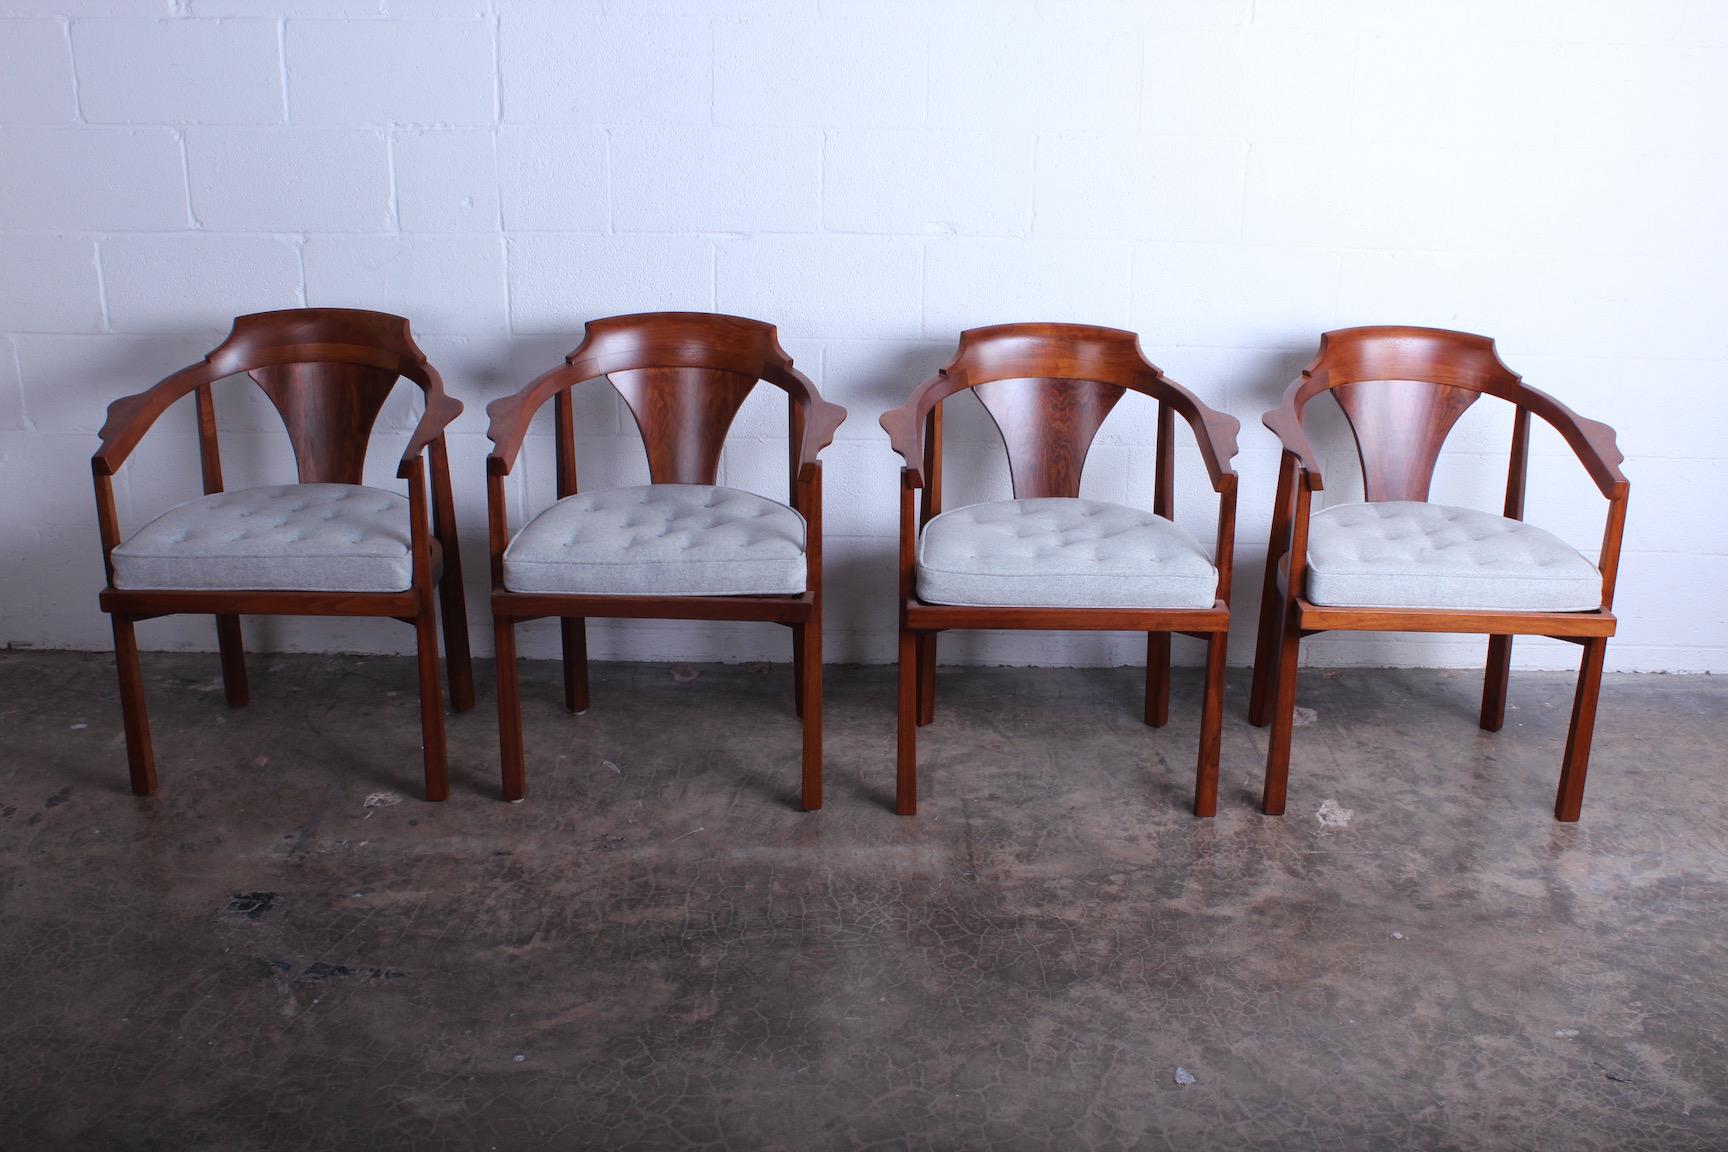 A set of four horseshoe armchairs designed by Edward Wormley for Dunbar.